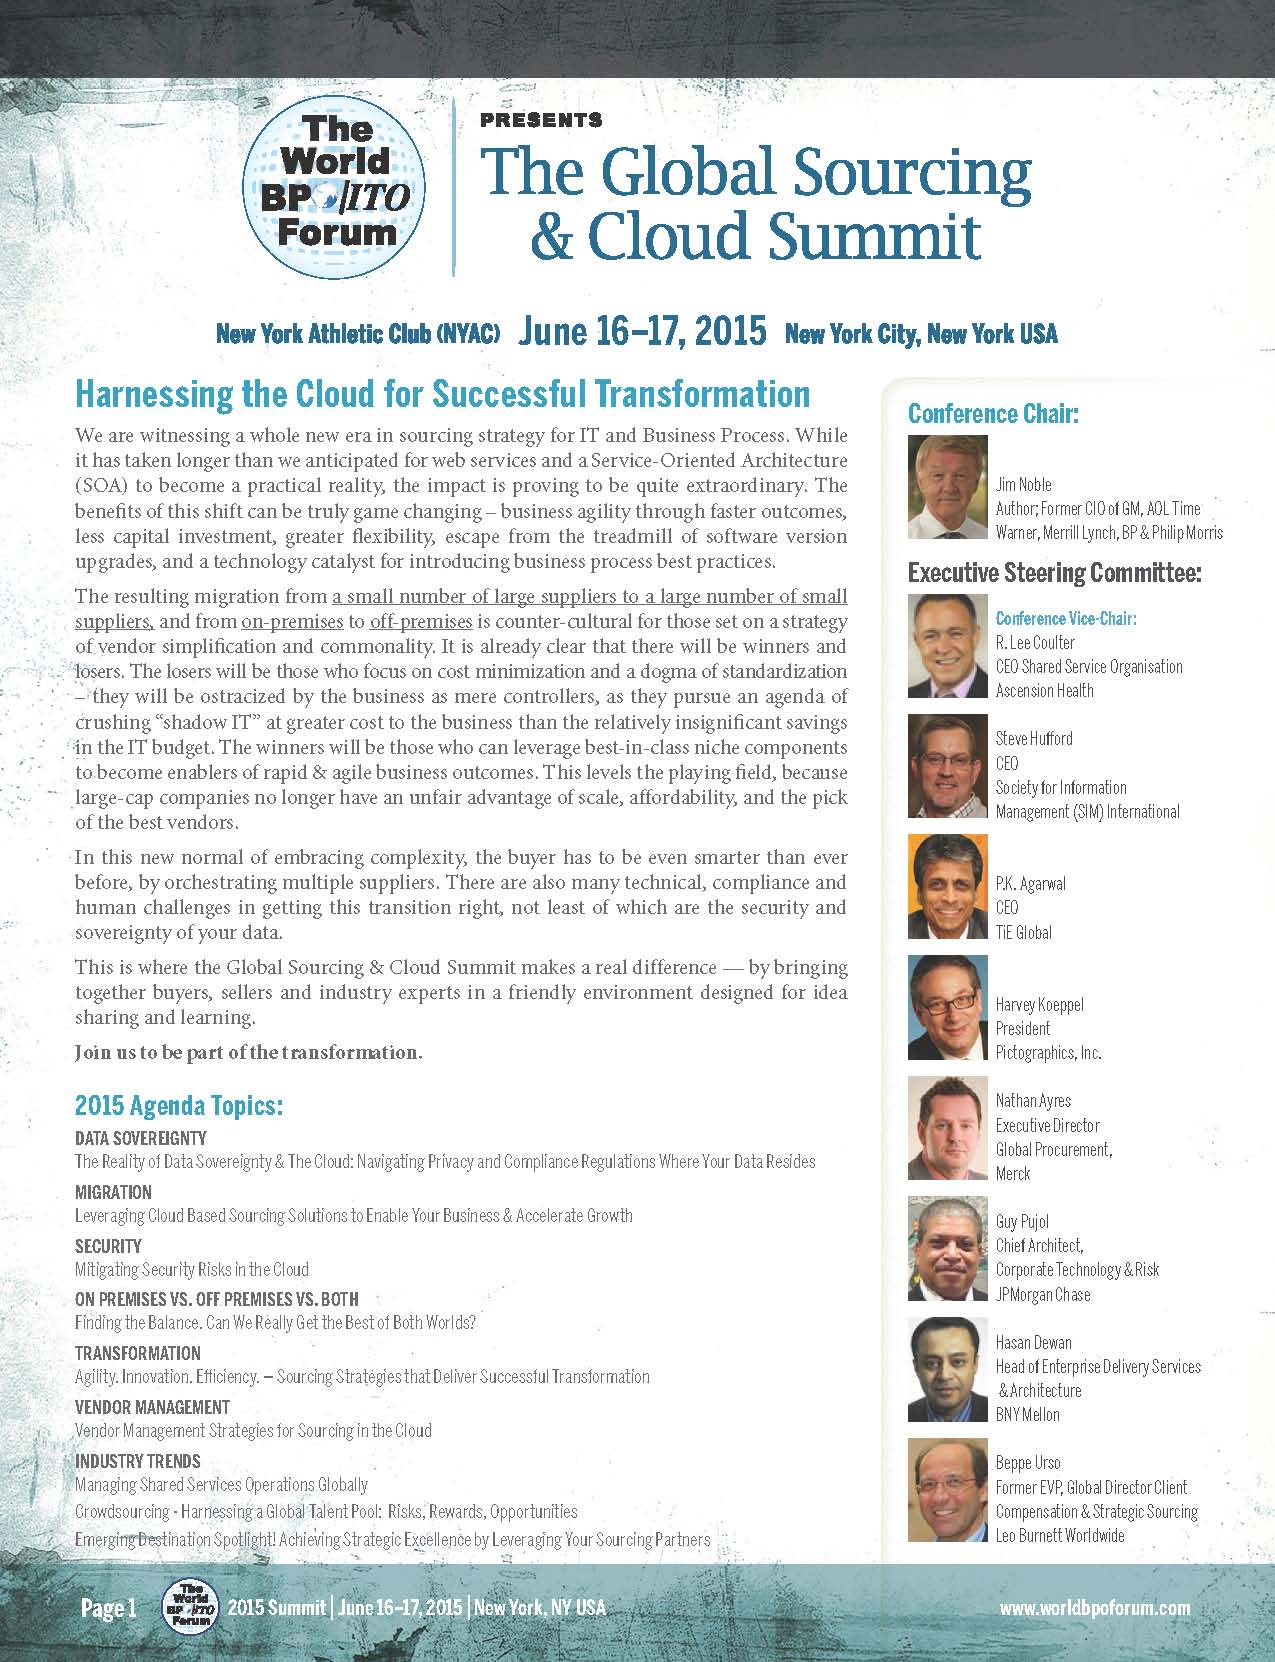 The Global Sourcing & Cloud Summit Overview